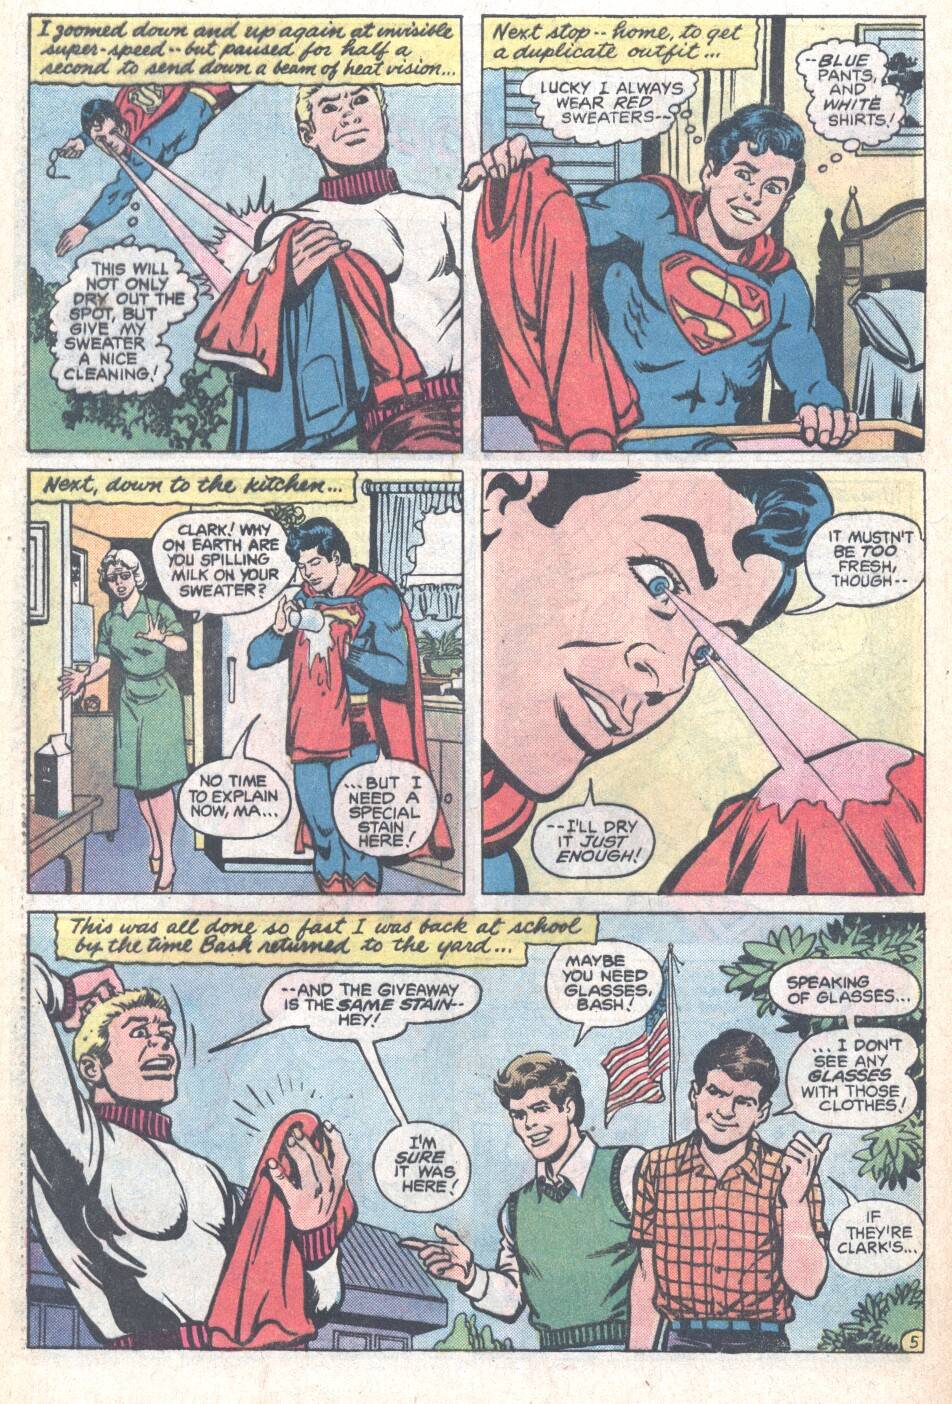 The New Adventures of Superboy 9 Page 24